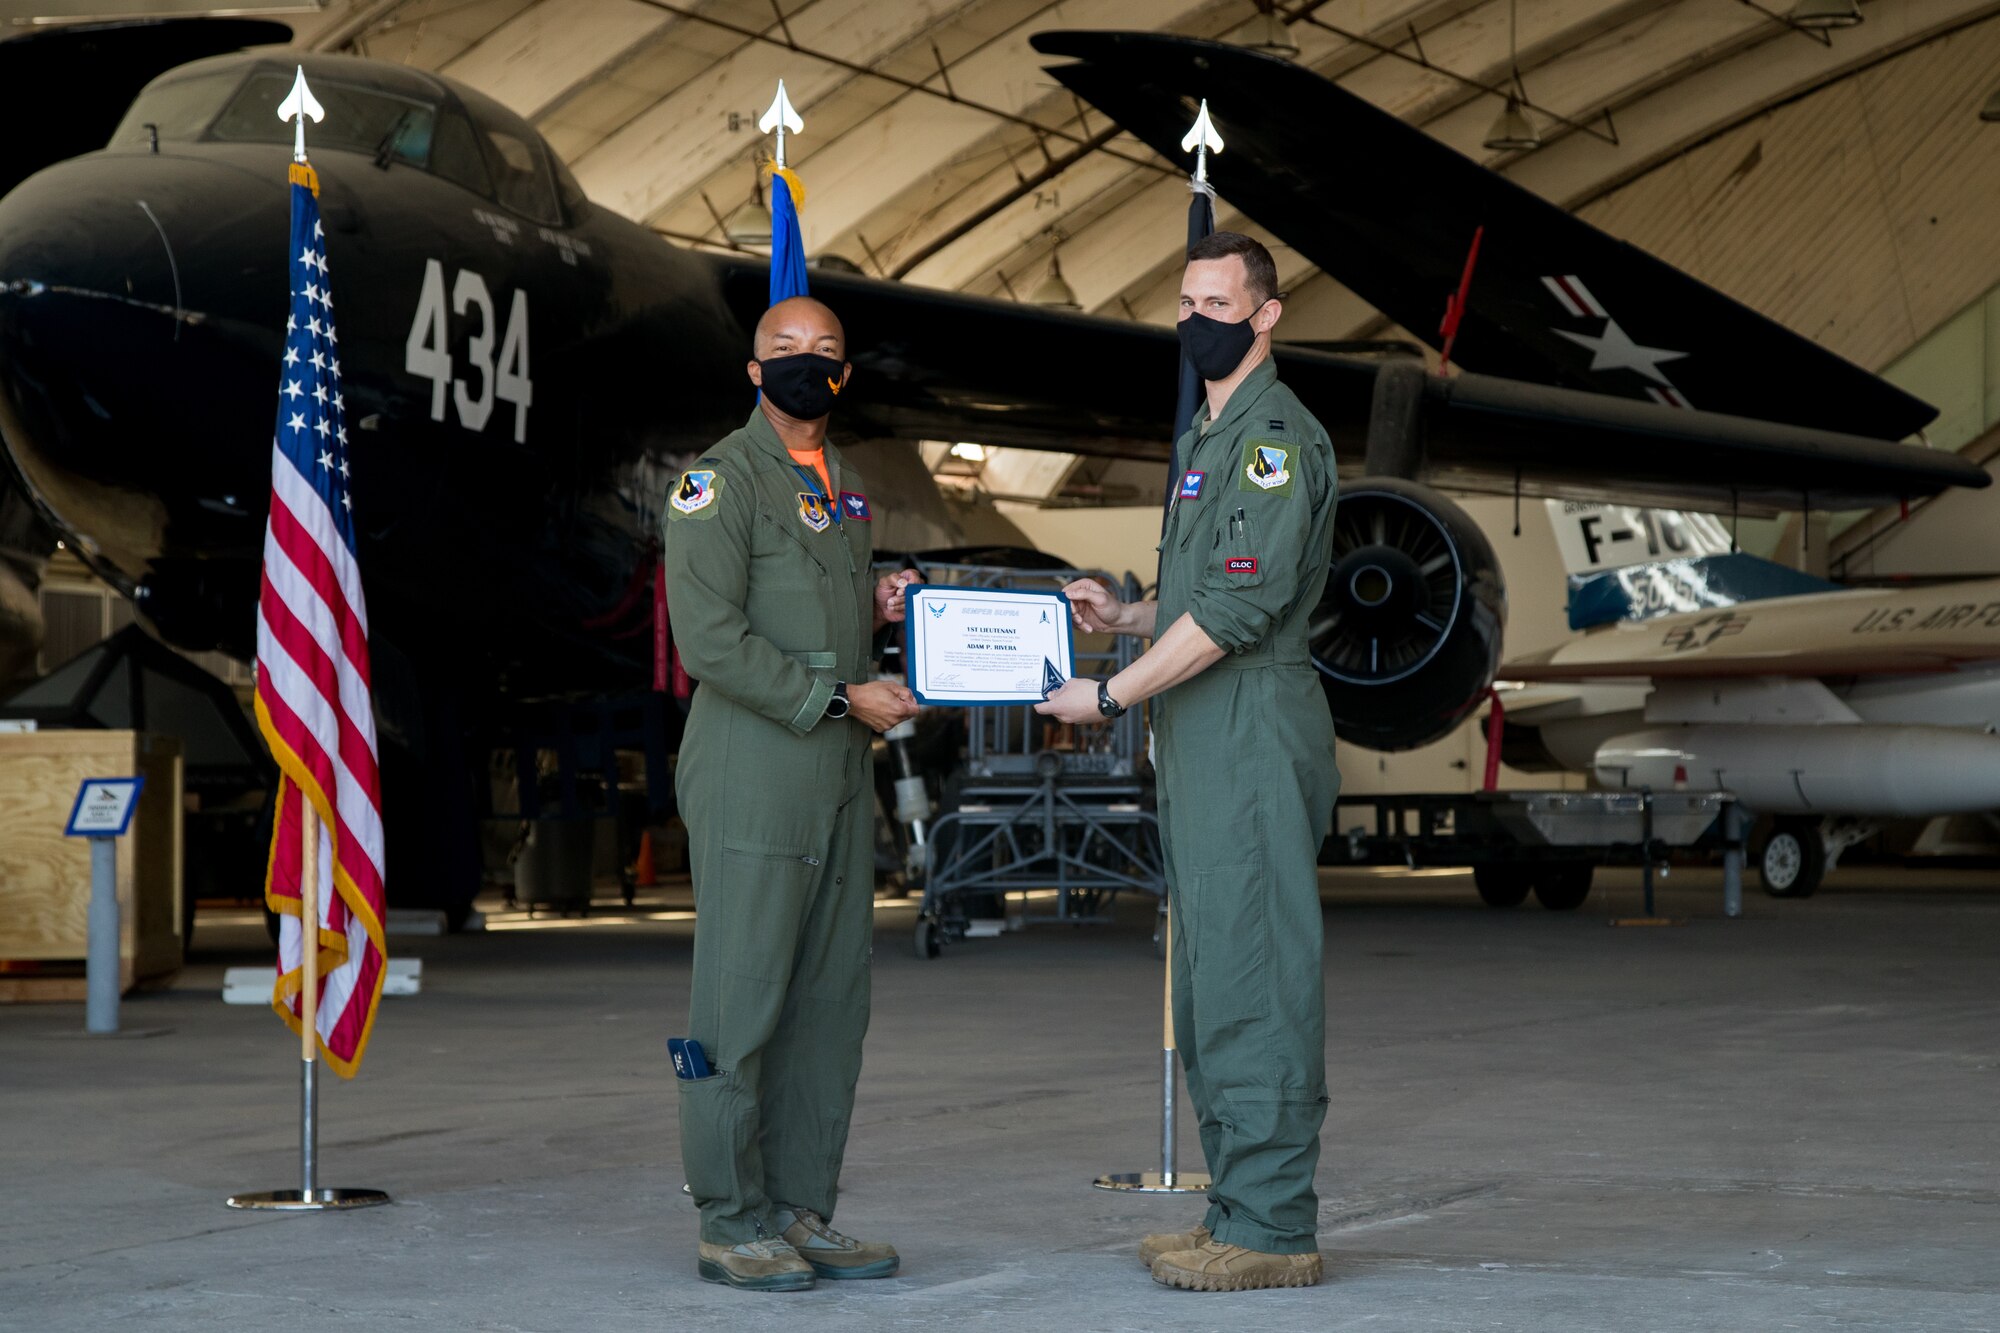 Capt. Christopher Reis, accepts his U.S. Space Force certificate from Col. Randel Gordon, 412th Test Wing Vice Commander, during a Space Force Transfer Ceremony at Edwards Air Force Base, California, Feb. 11. (Air Force photo by Richard Gonzales)